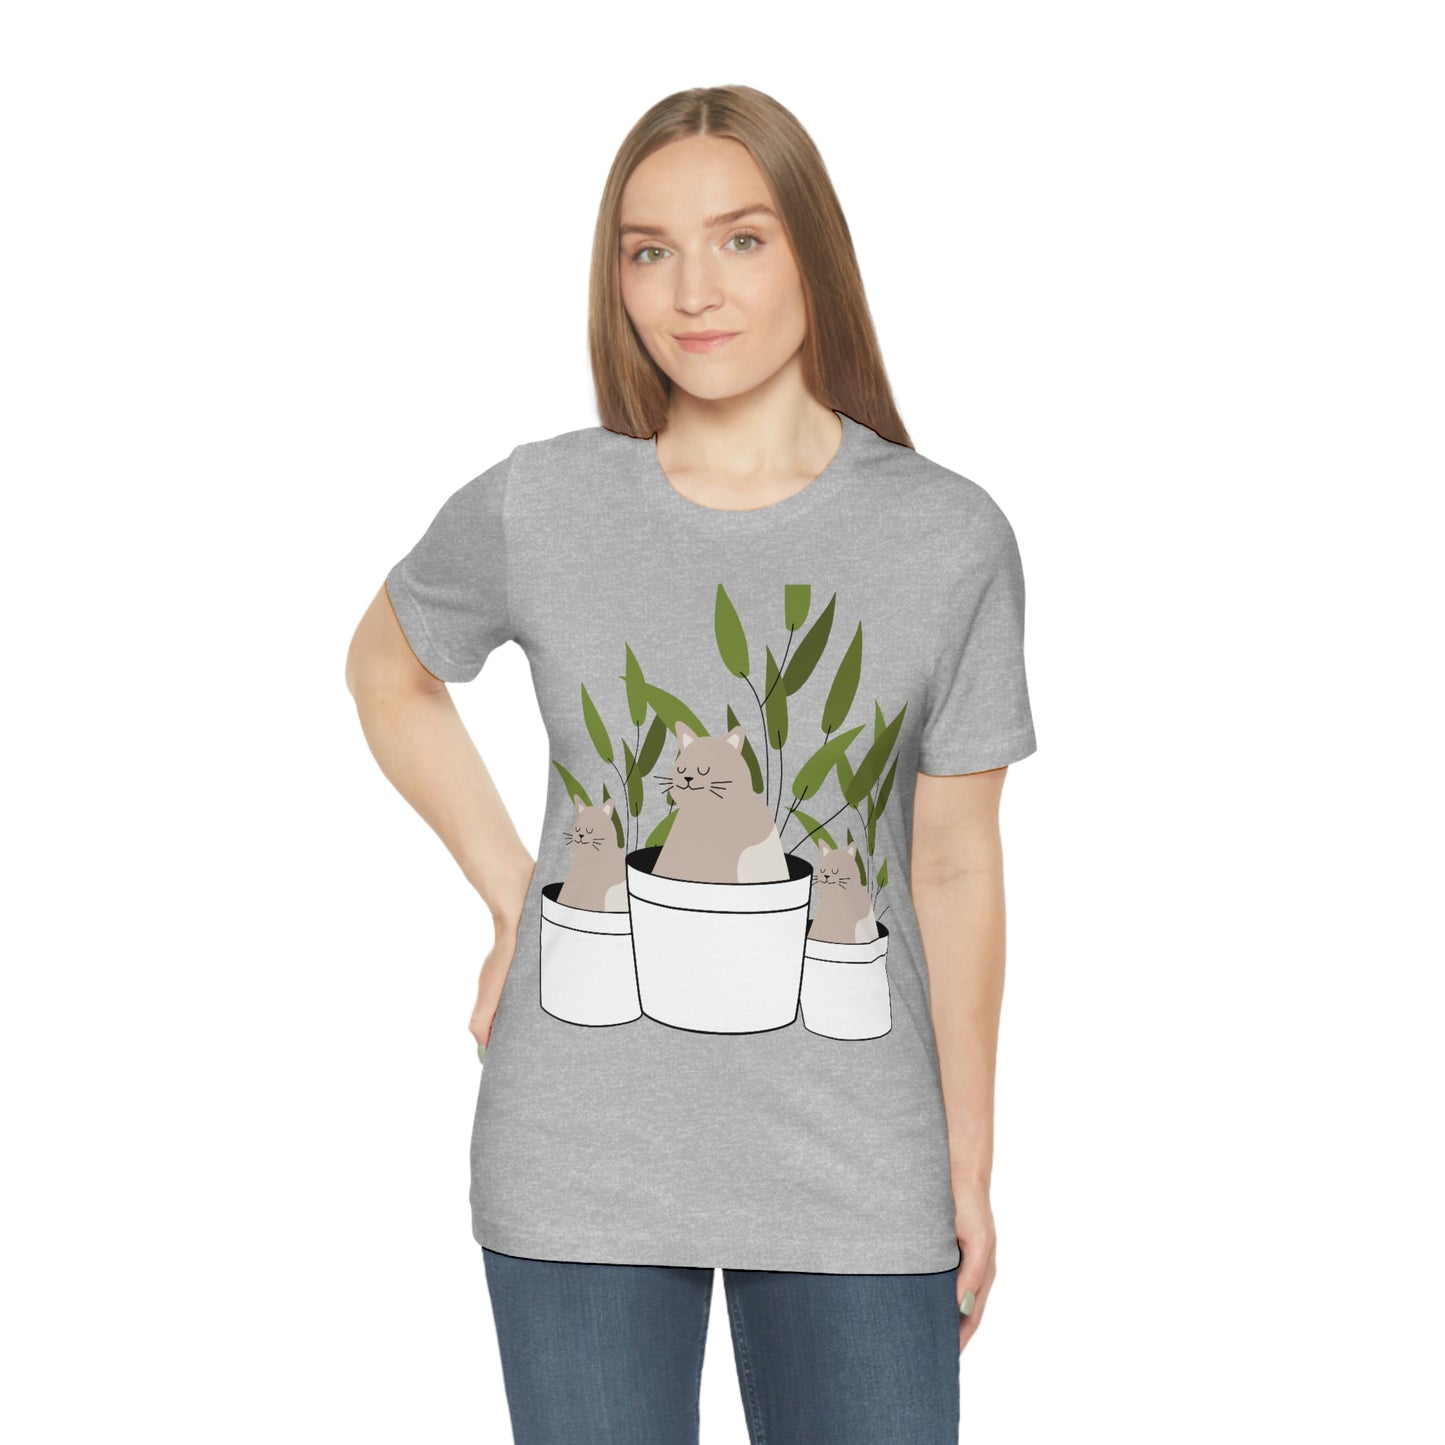 Unisex Jersey Short Sleeve Tee -Love cats and plants